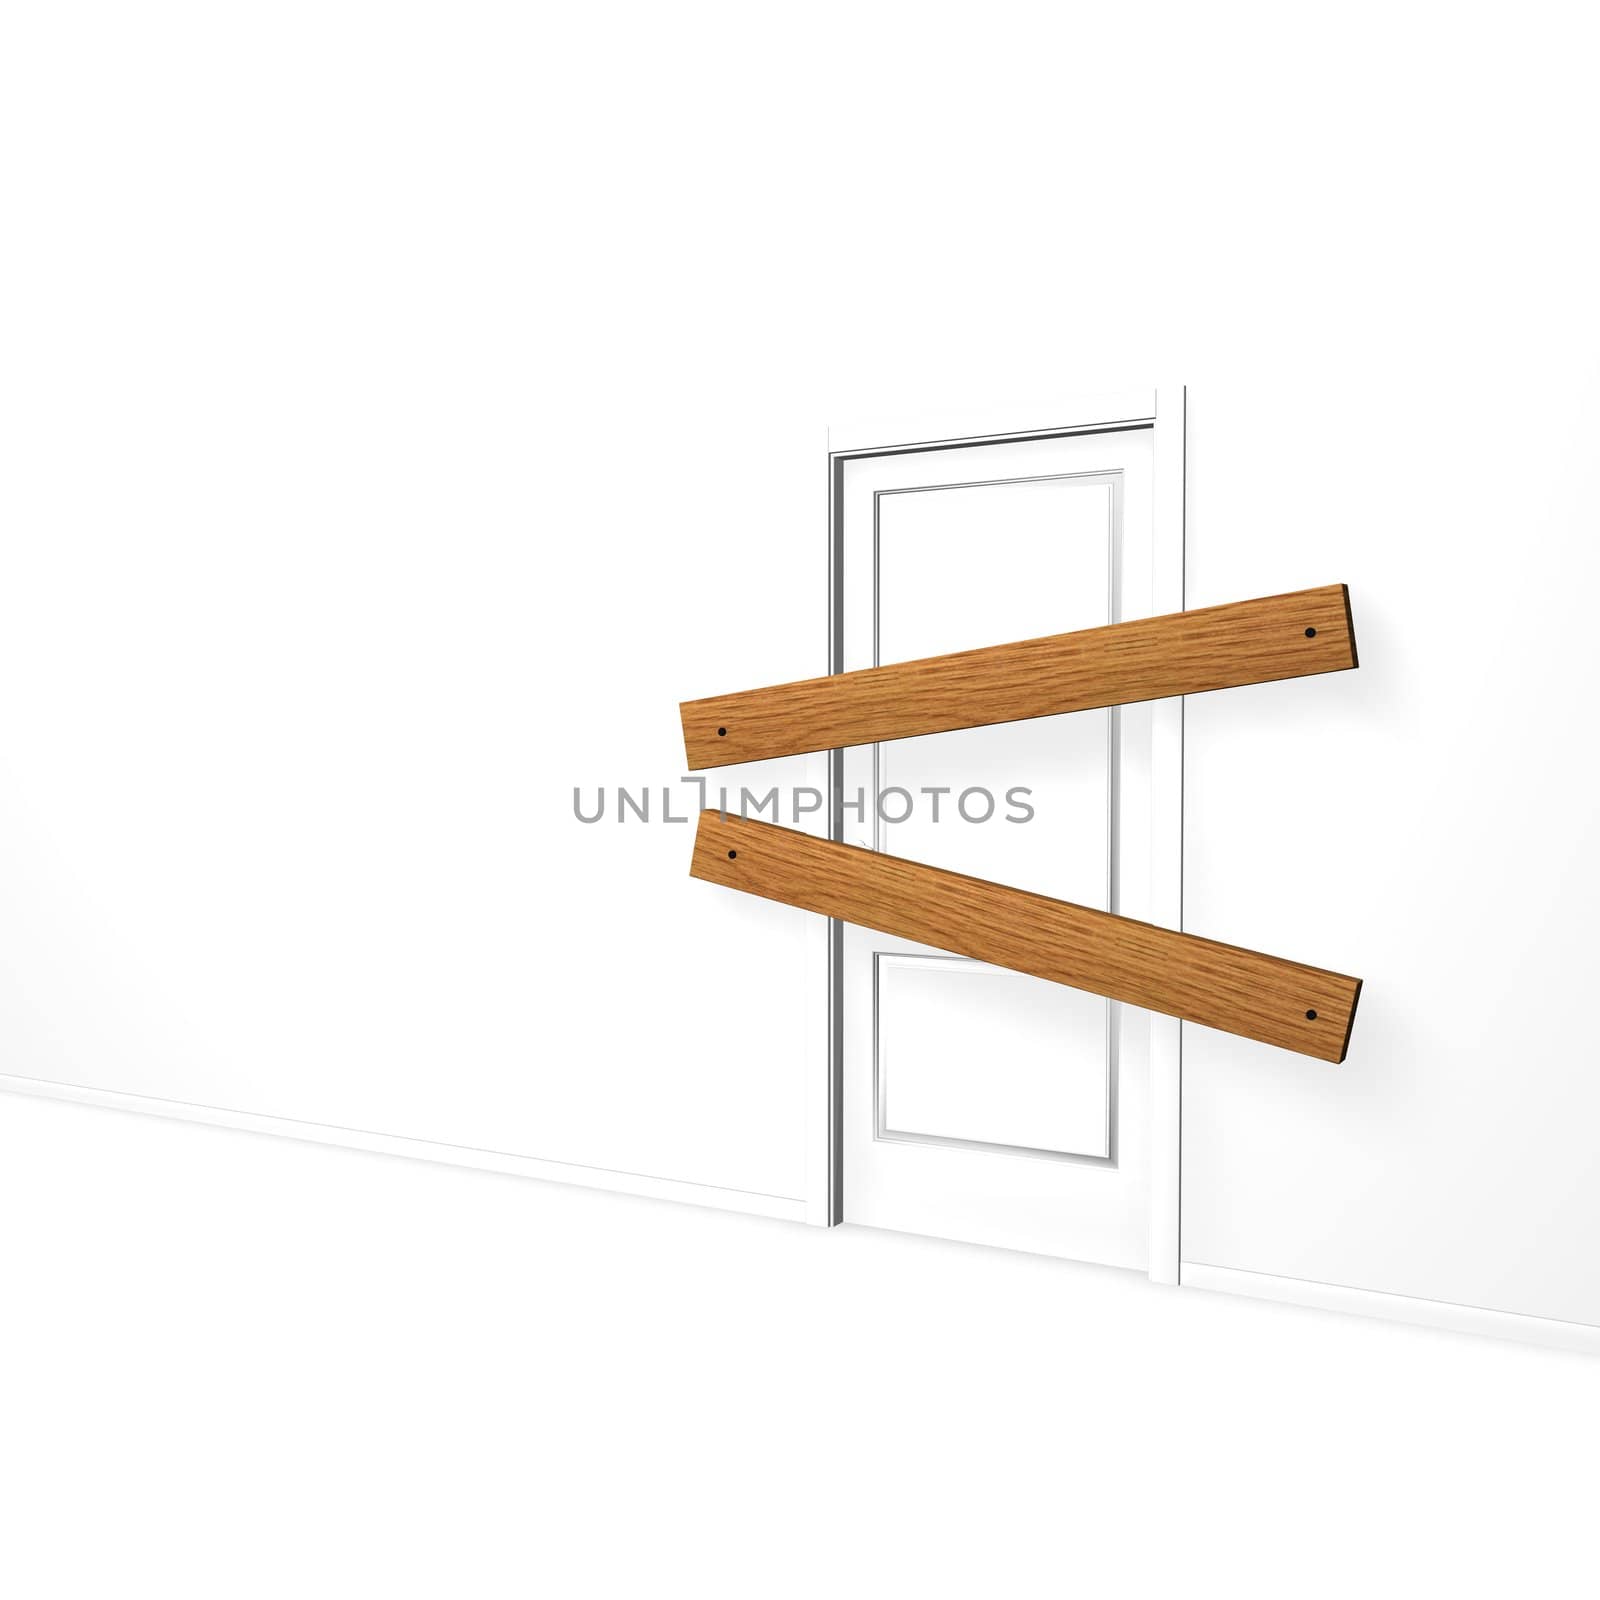 door closed with wooden planks - 3d illustration